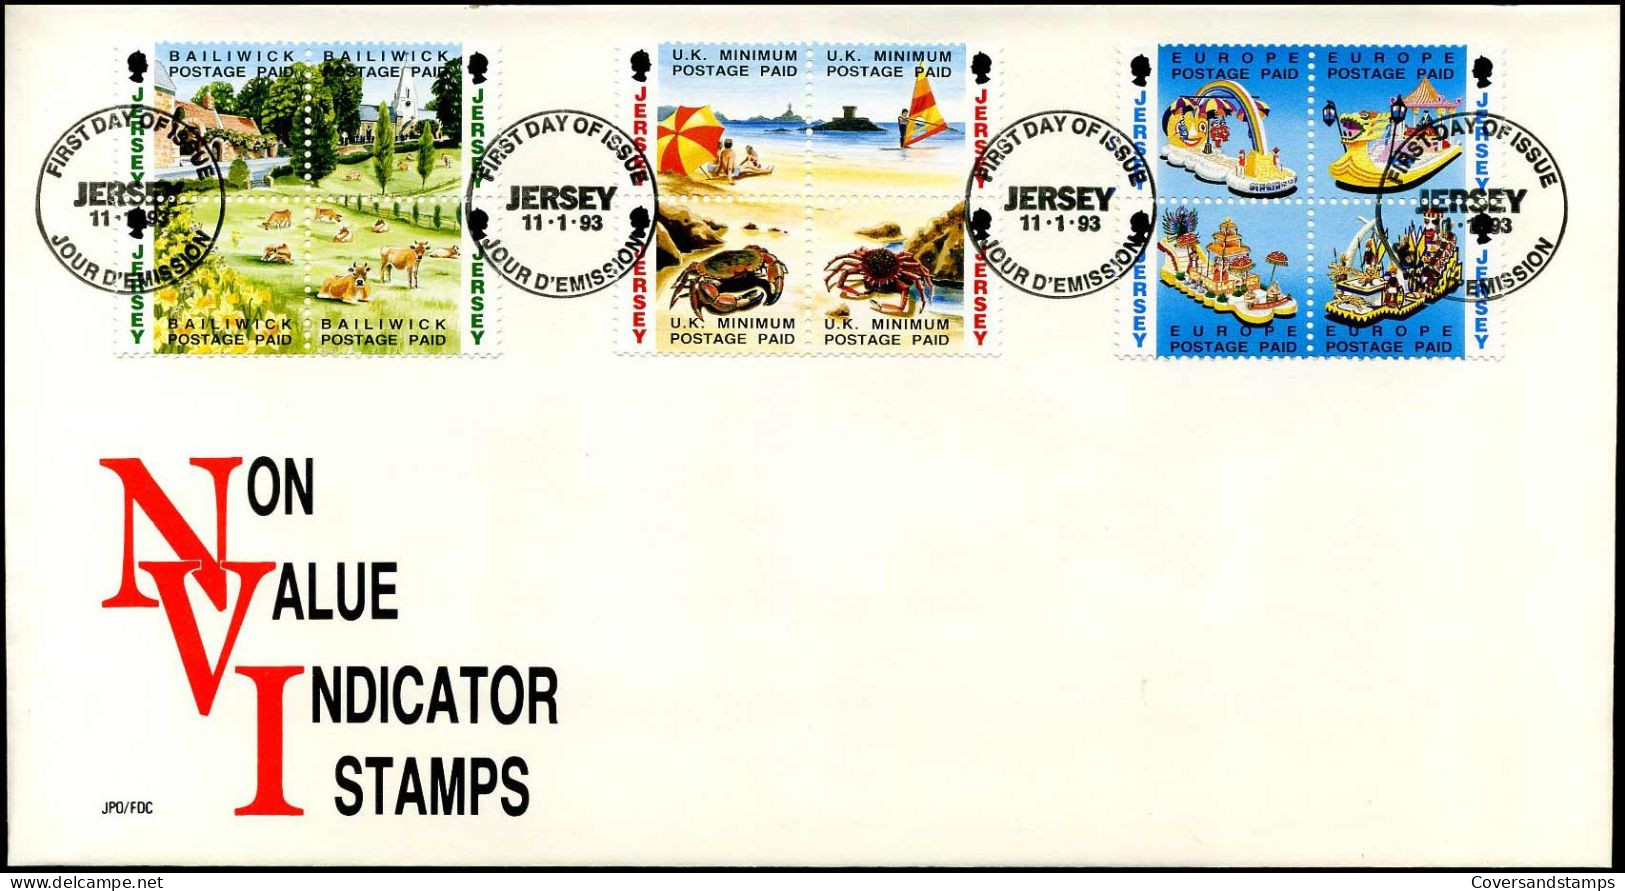 FDC - Non Value Indicator Stamps 1993 - Jersey